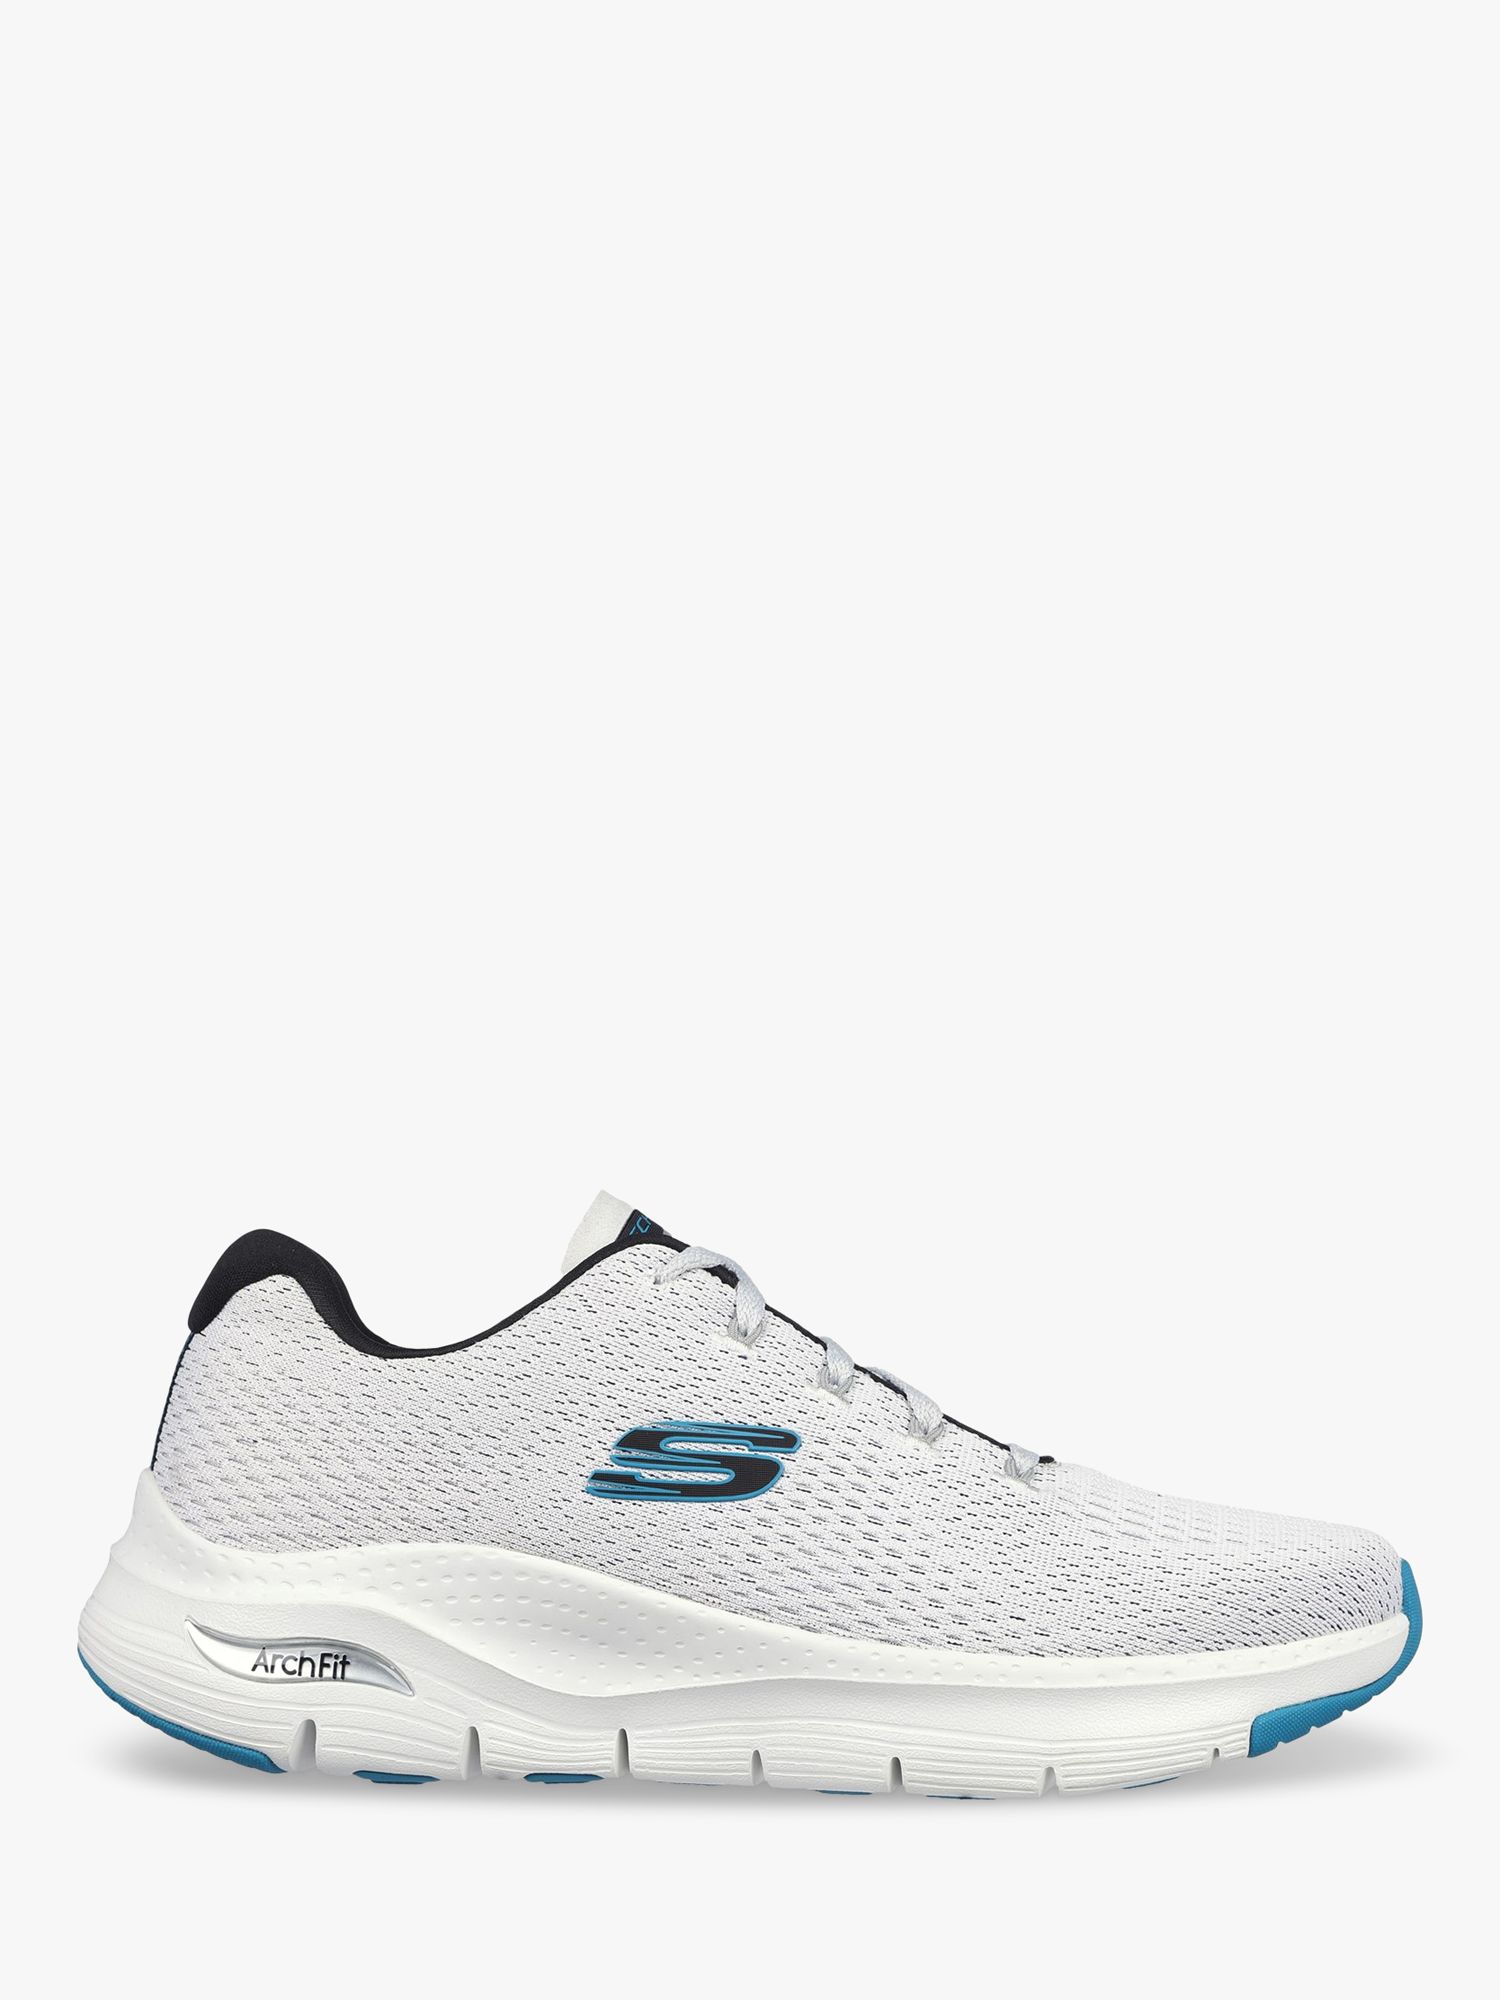 Skechers Arch Fit Takar Trainers